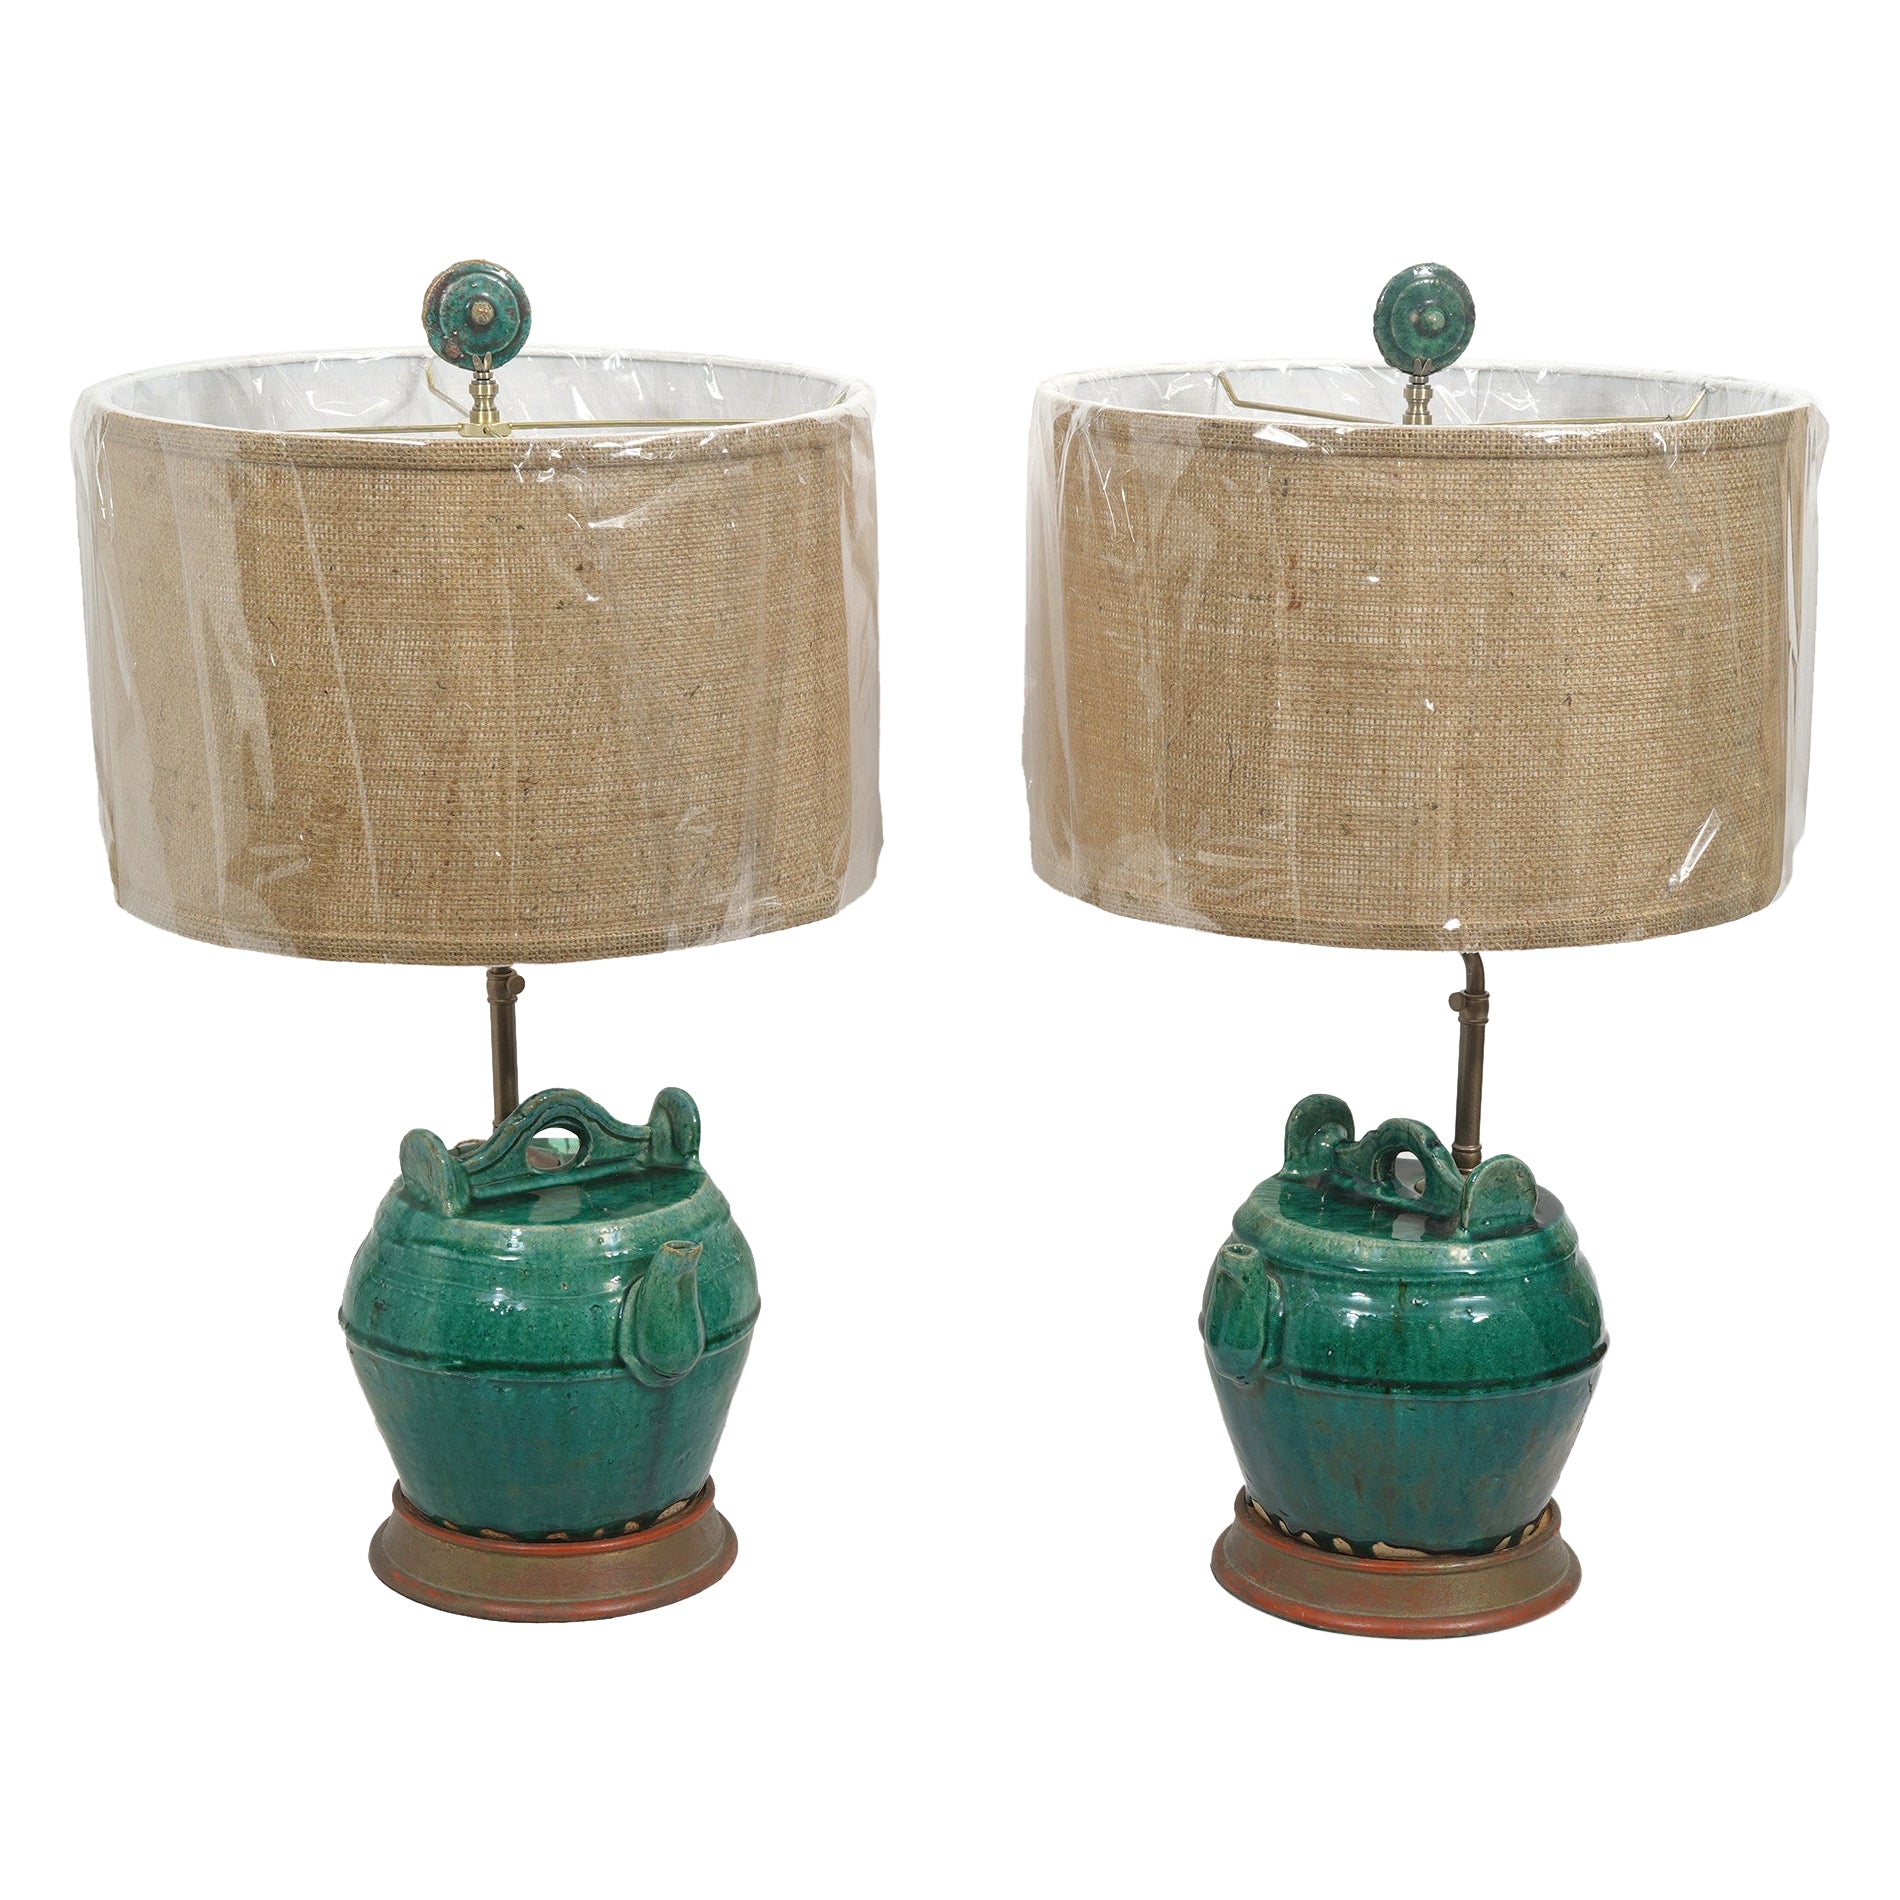 Pair of Antique Chinese Ceramic Jars Mounted as Table Lamps